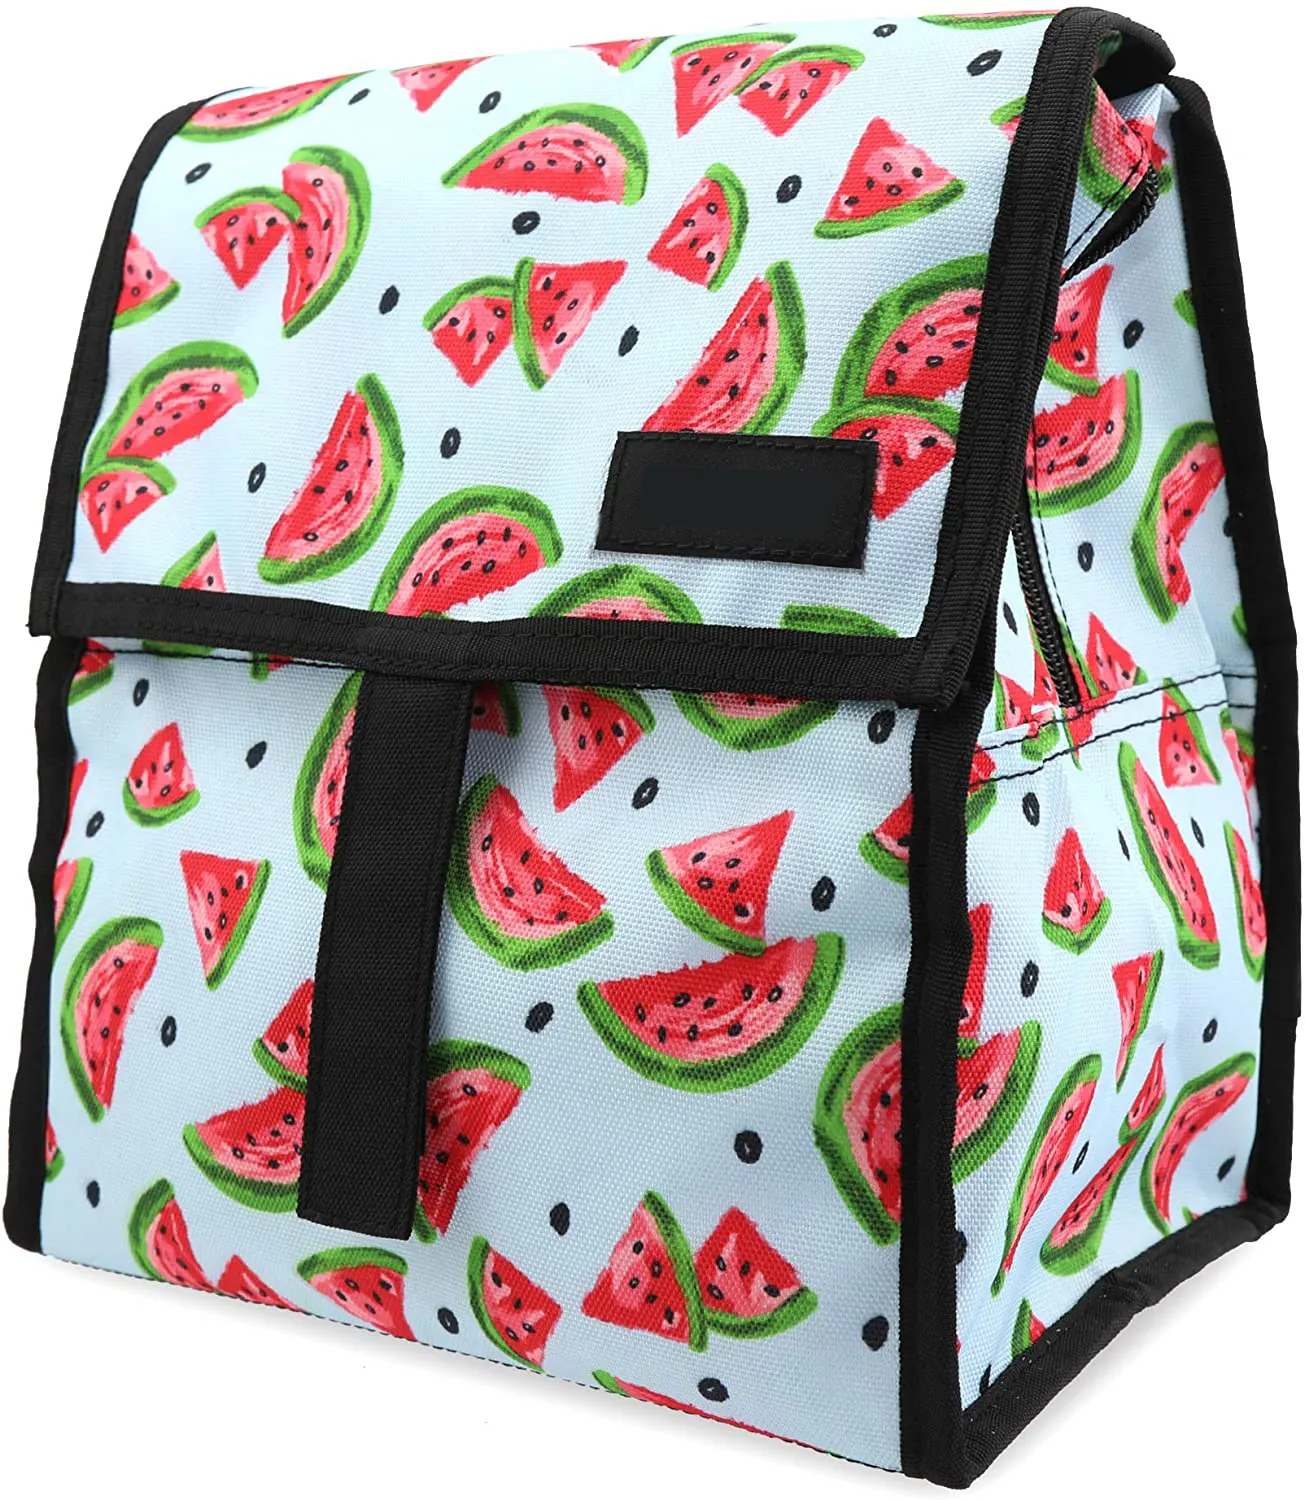 Insulated School Lunch Bag For Kids Wholesale Insulated Cooler Bags Picnic Reusable Ice Cooler Bag